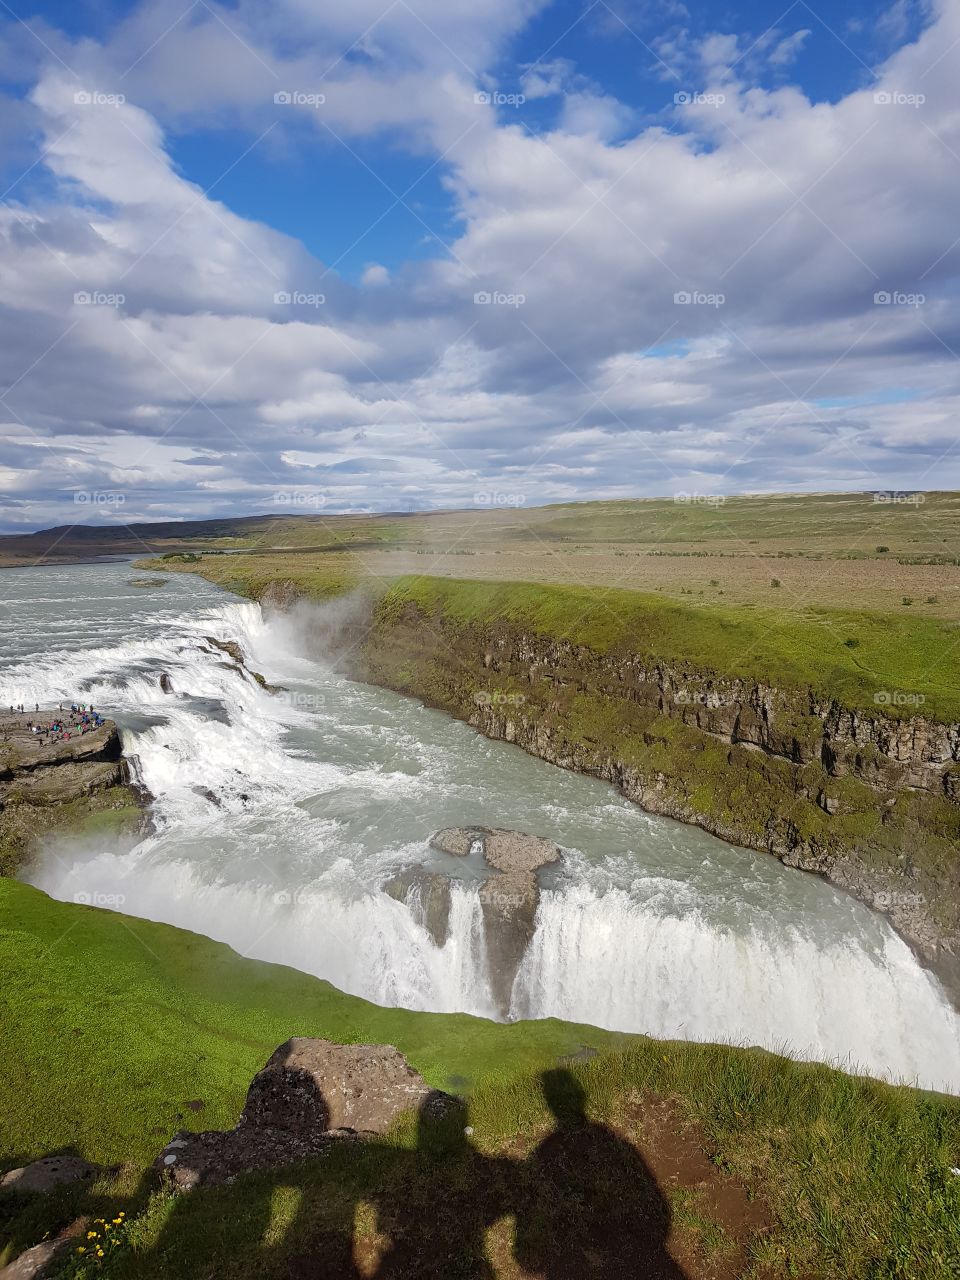 huge waterfall and great view of Iceland landscapes